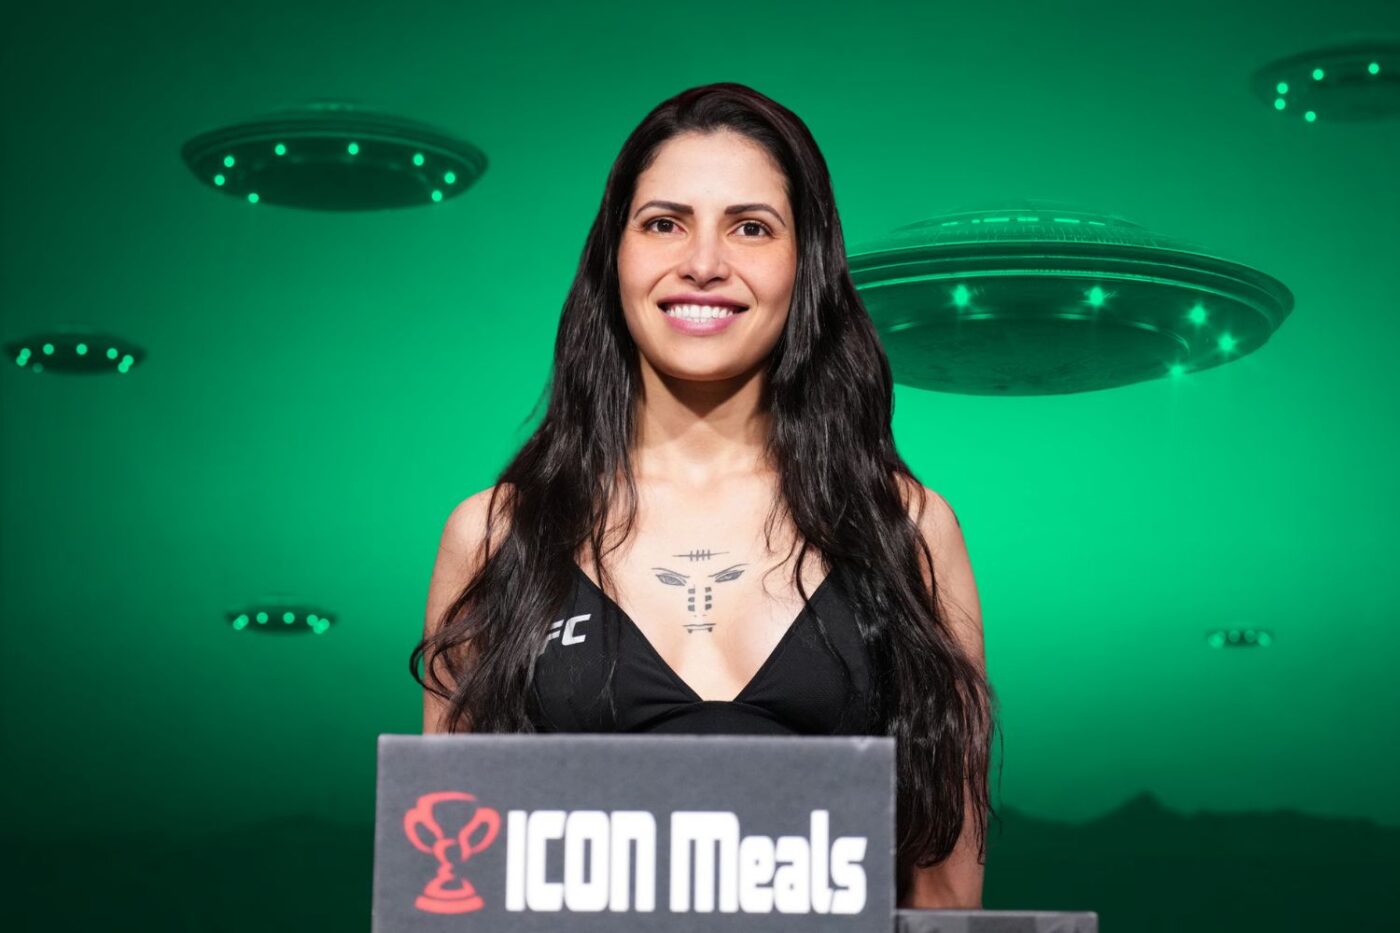 UFC Star Polyana Viana Says She Will Use Seduction To Fight Off An Alien Attack